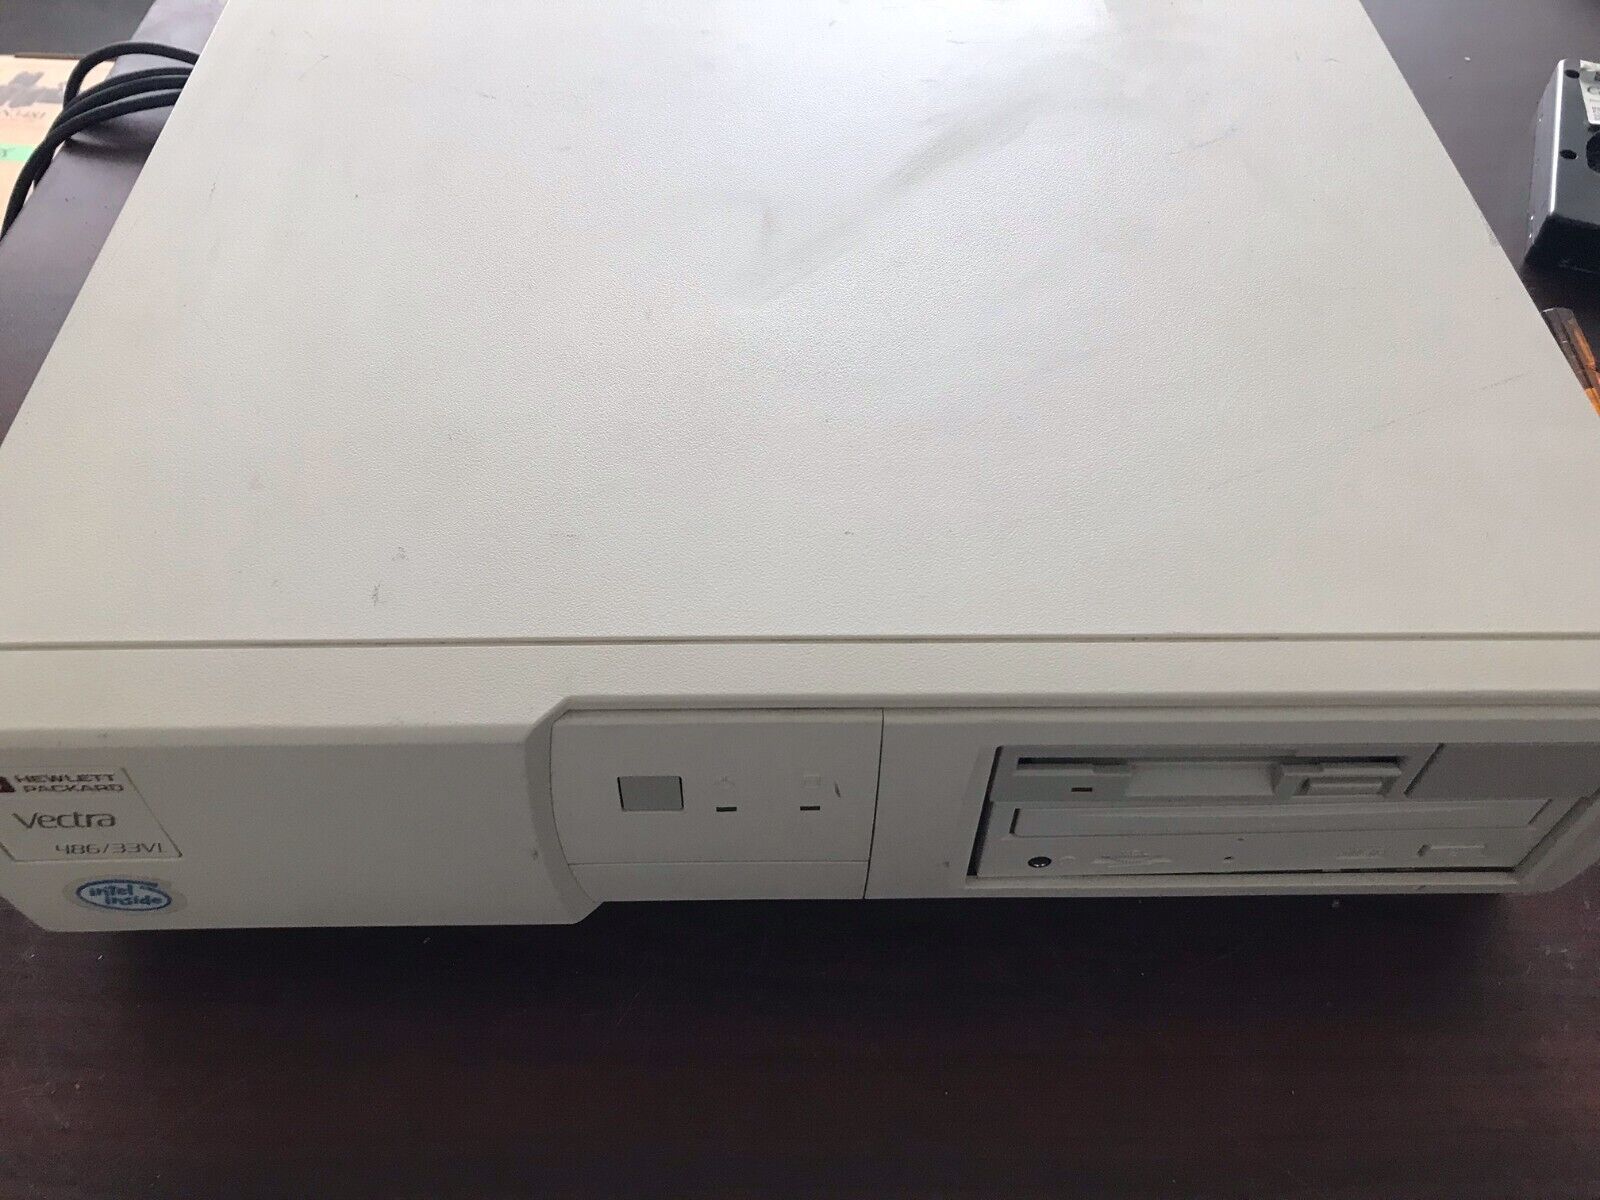 VERY RARE Vintage HP Vectra 486/33VL 16MB RAM/ MB1626 HDD AMAZING DEAL 1993 VINT